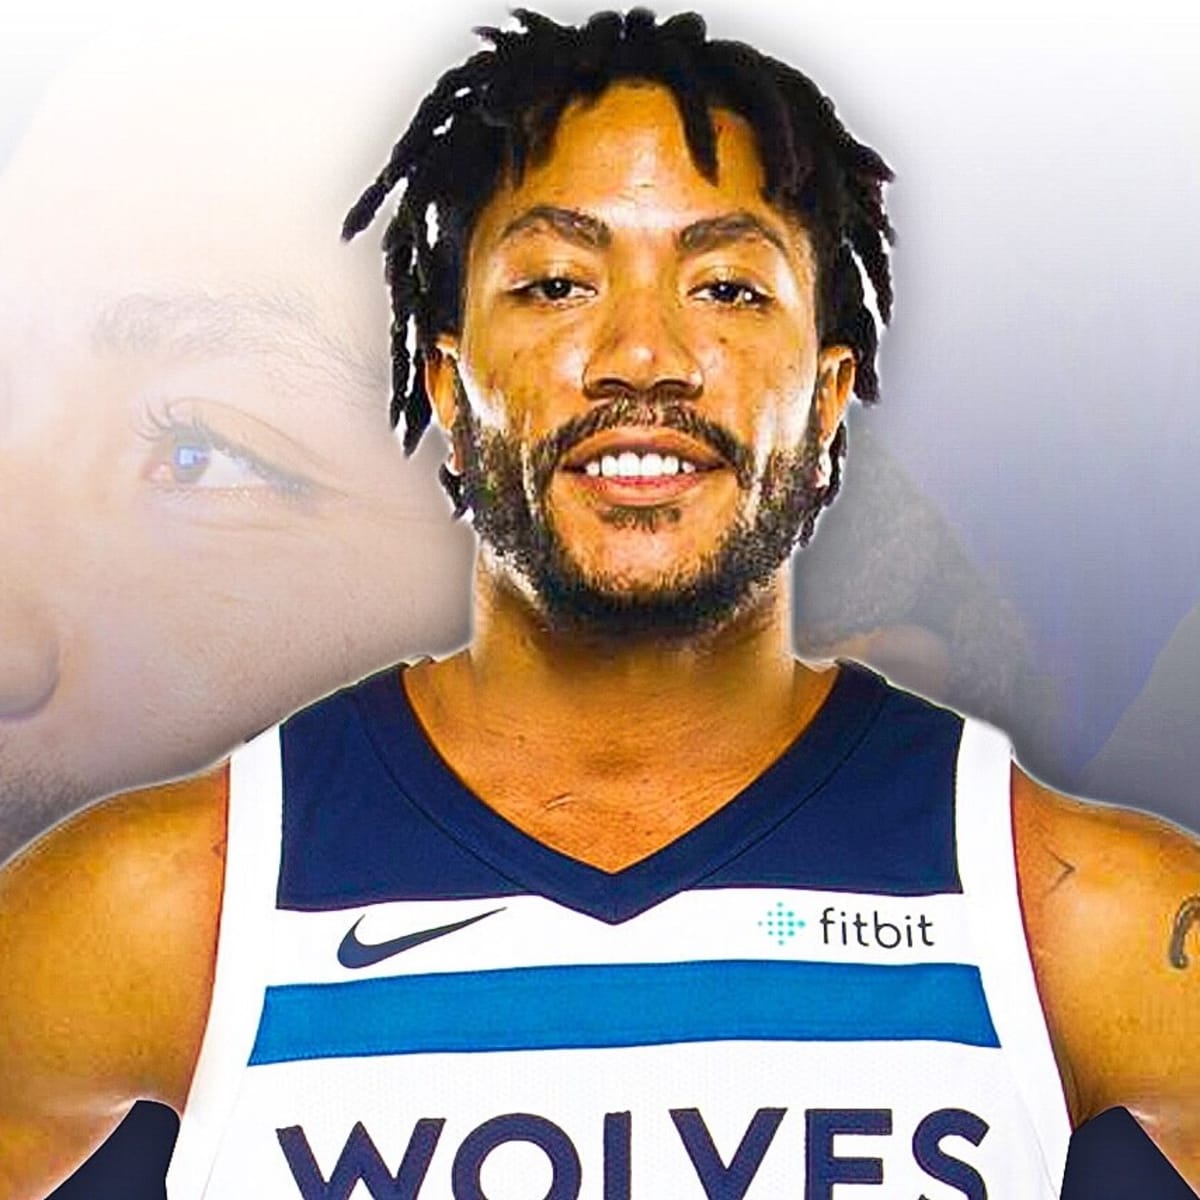 Chicago Remains Enamored By and 'Forever Proud' of Derrick Rose